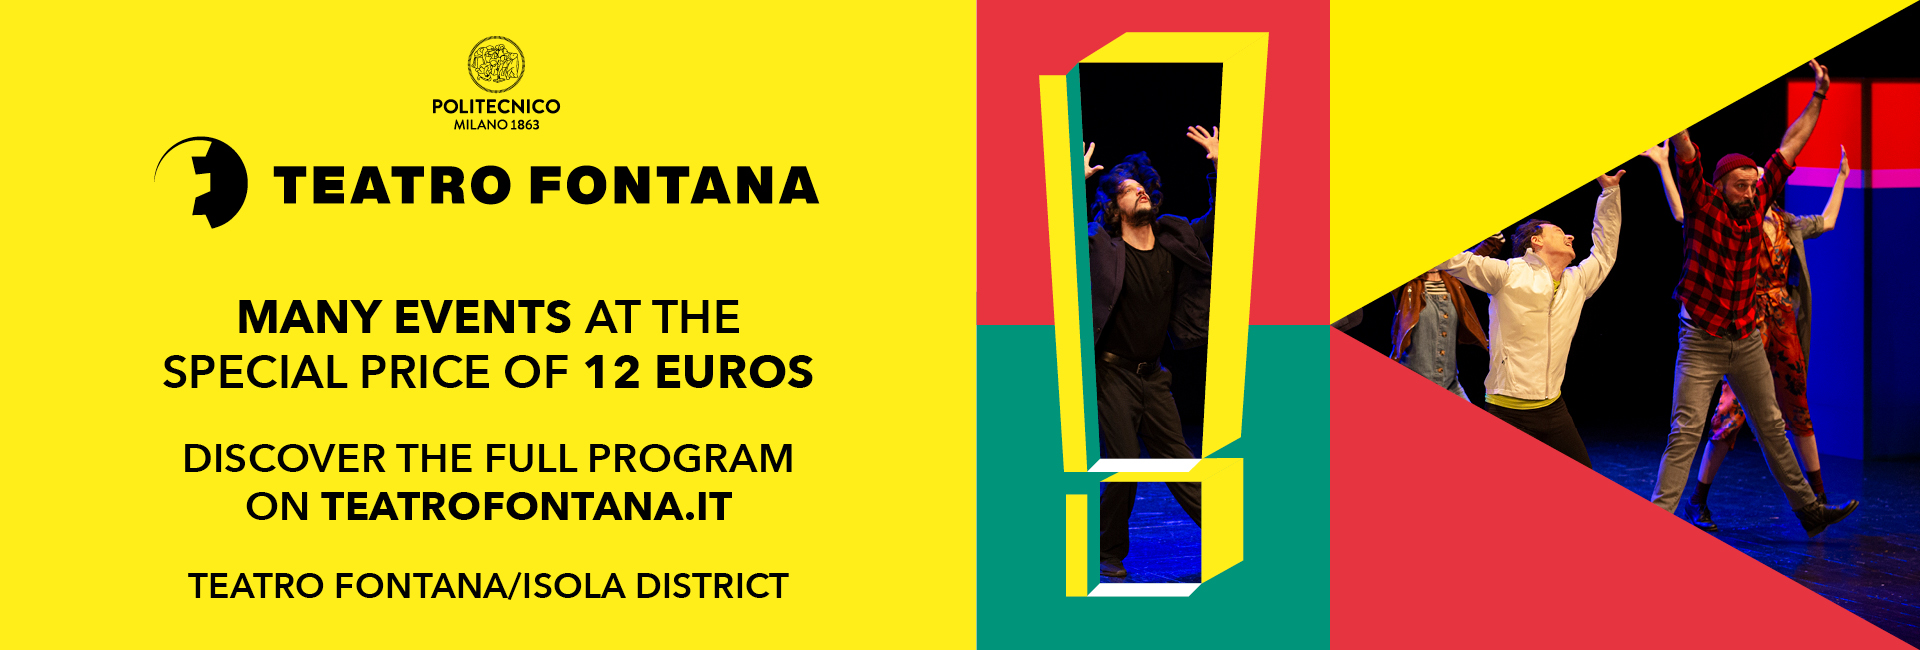 TEATRO FONTANA: many events at the special price of 12 euros - Discover the full program on teatrofontana.it